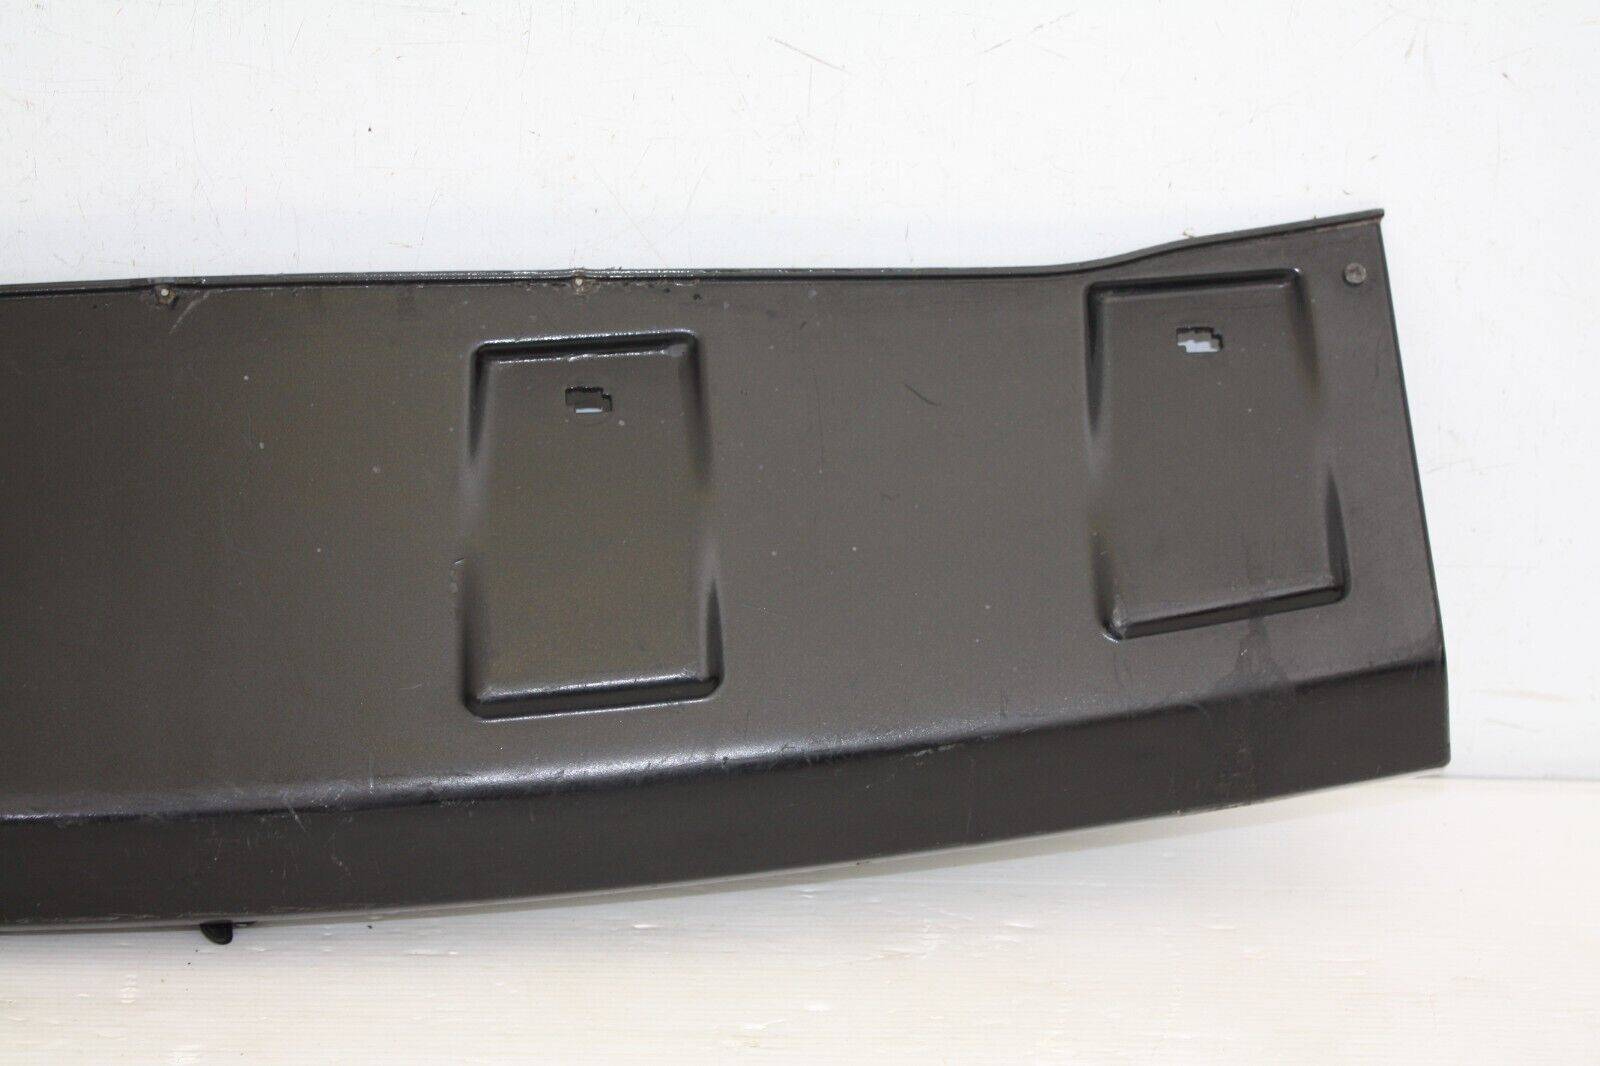 Range-Rover-Autobiography-Front-Bumper-Lower-Section-BH4M-17F021-A-SEE-PICS-175744651531-3